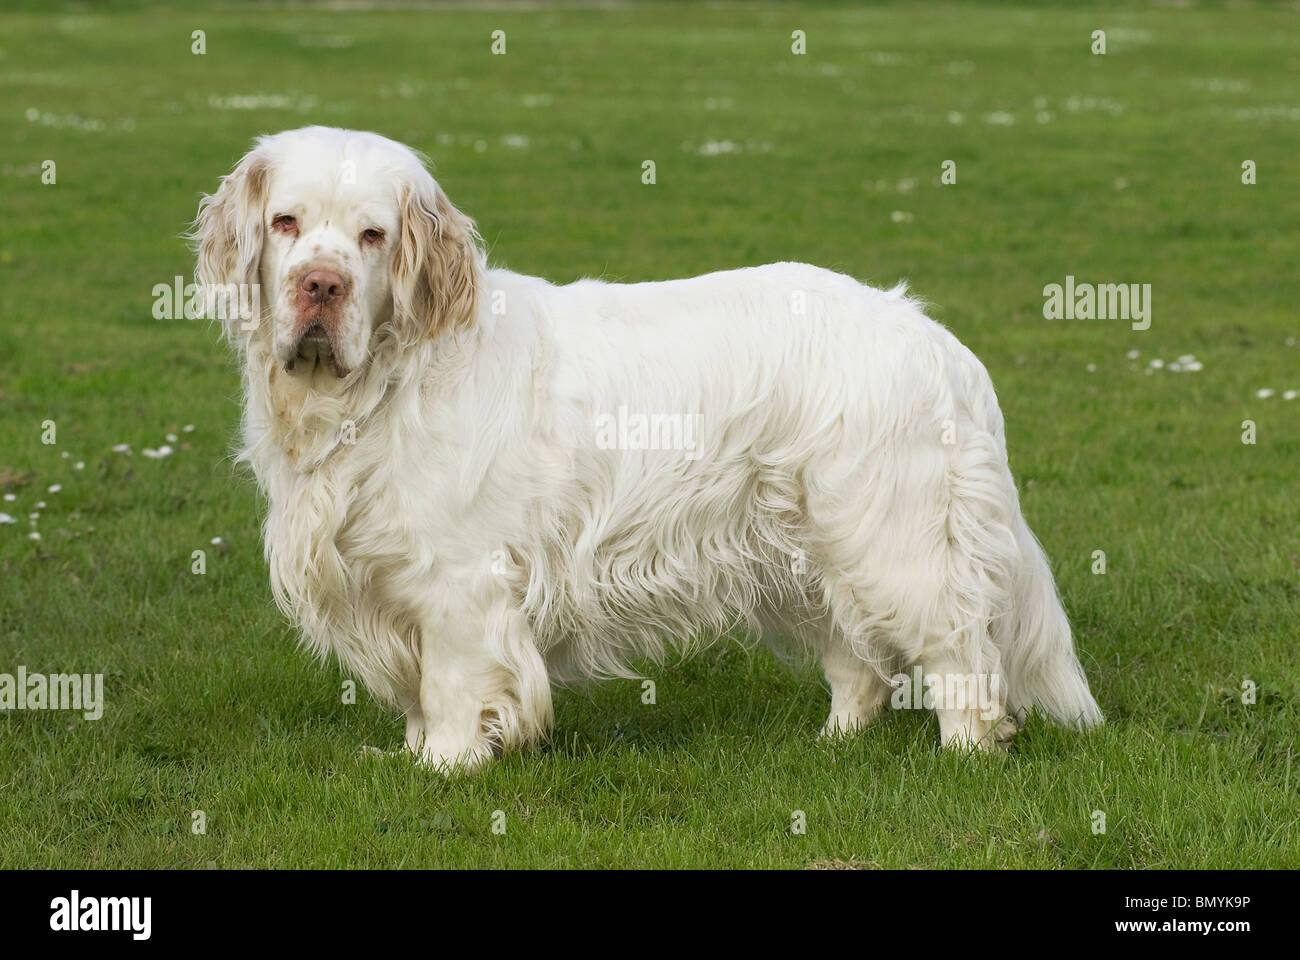 Clumber Spaniel. Adult dog standing a meadow Stock Photo